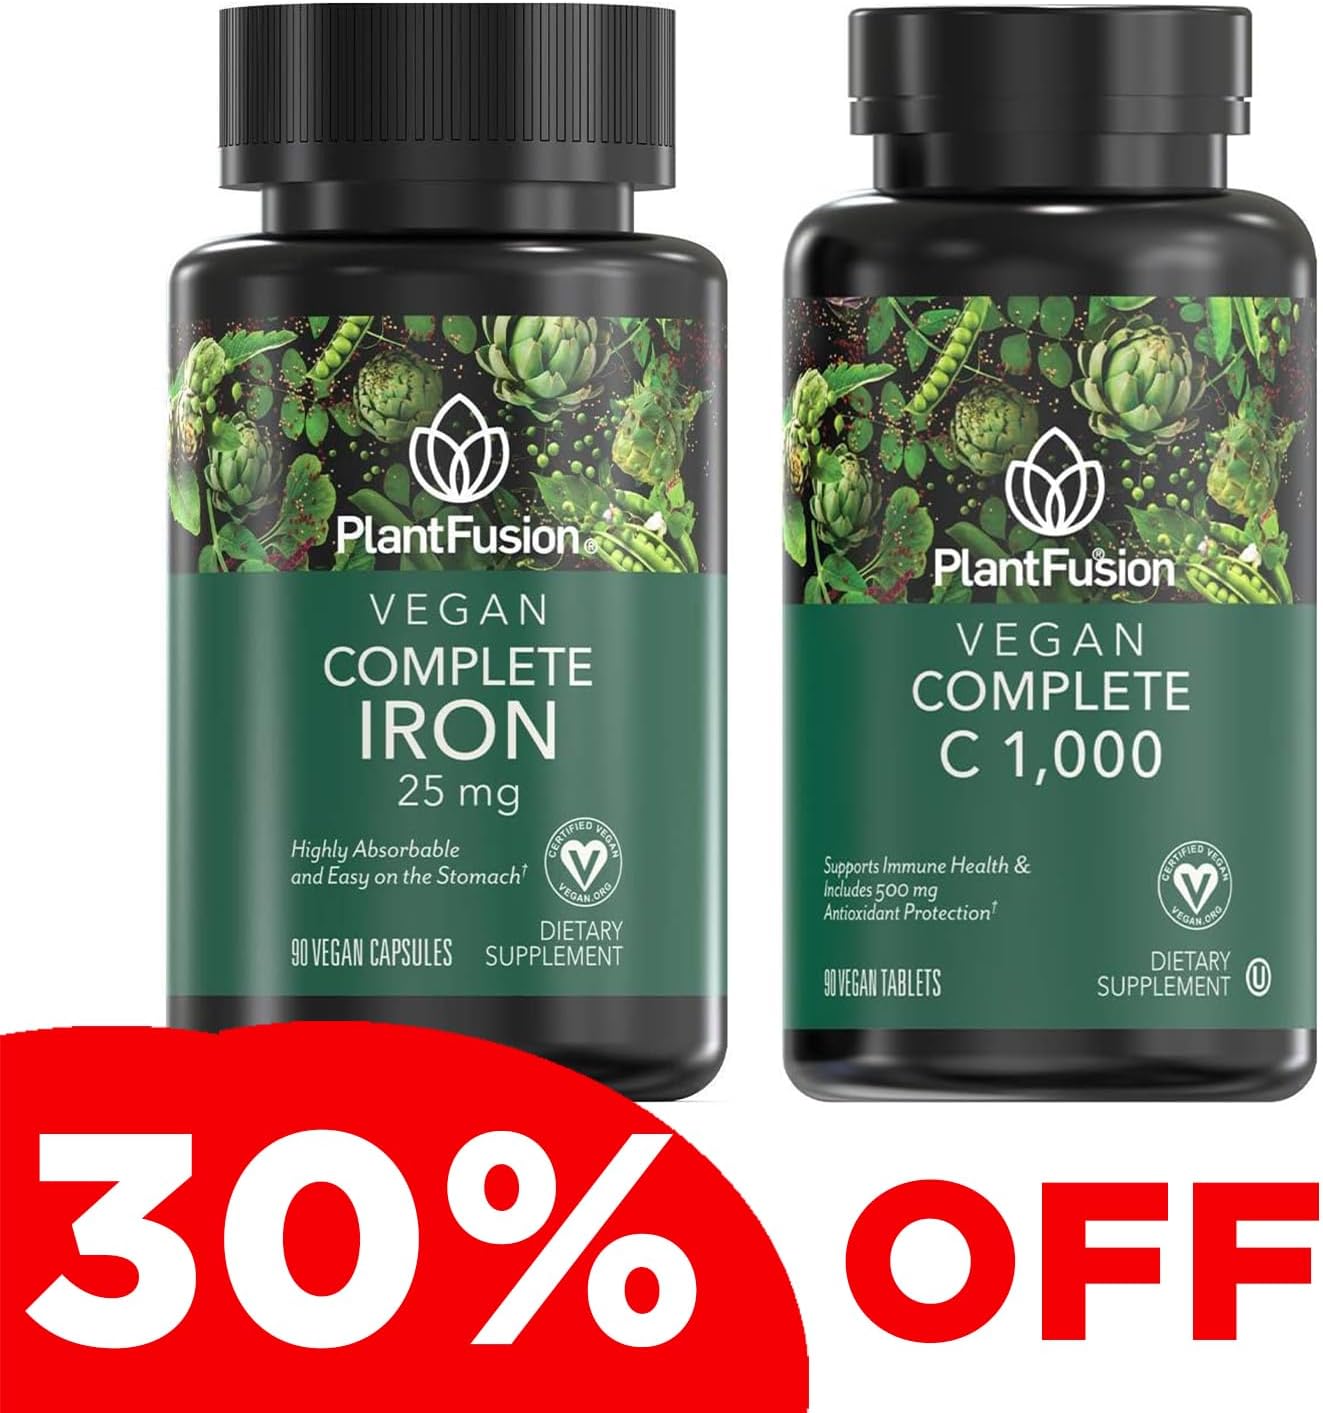 PlantFusion Vegan Iron & Vitamin C Bundle - Premium Plant Based Iron 25mg and Vitamin C 1000mg for Healthy Energy Levels & Immune Health Support